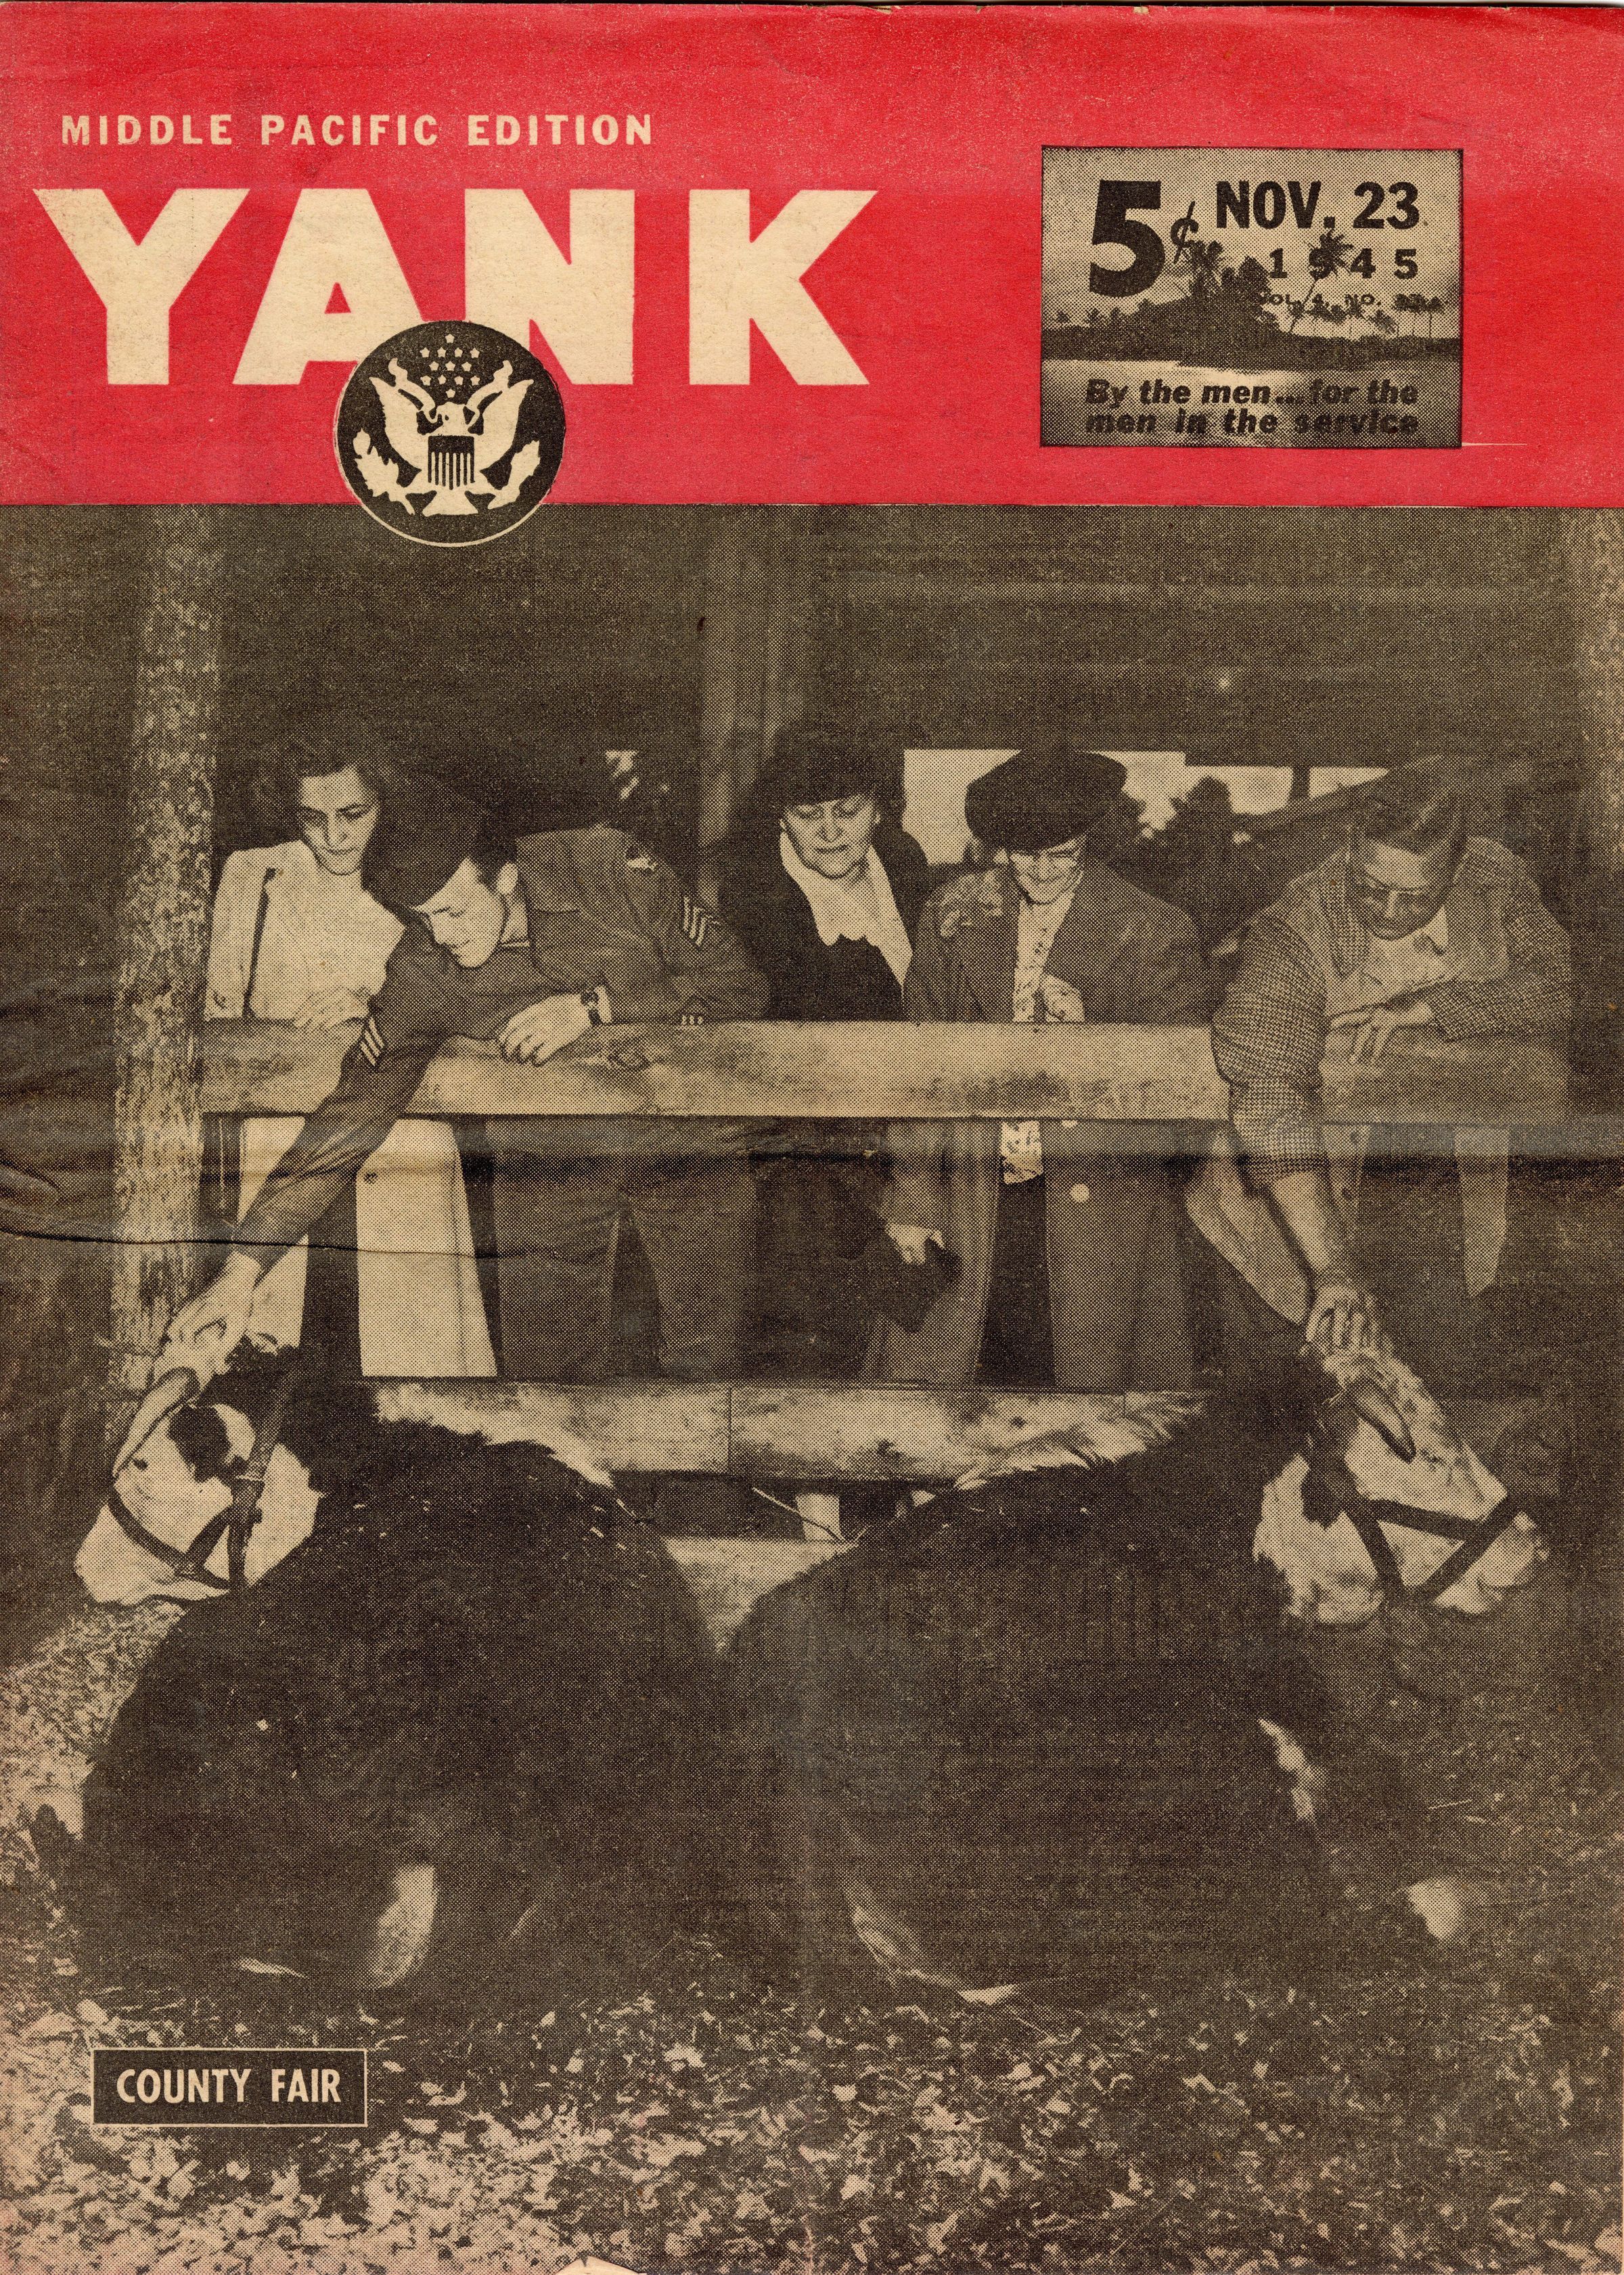 Primary Image of Yank: Middle Pacific Edition, November 23, 1945